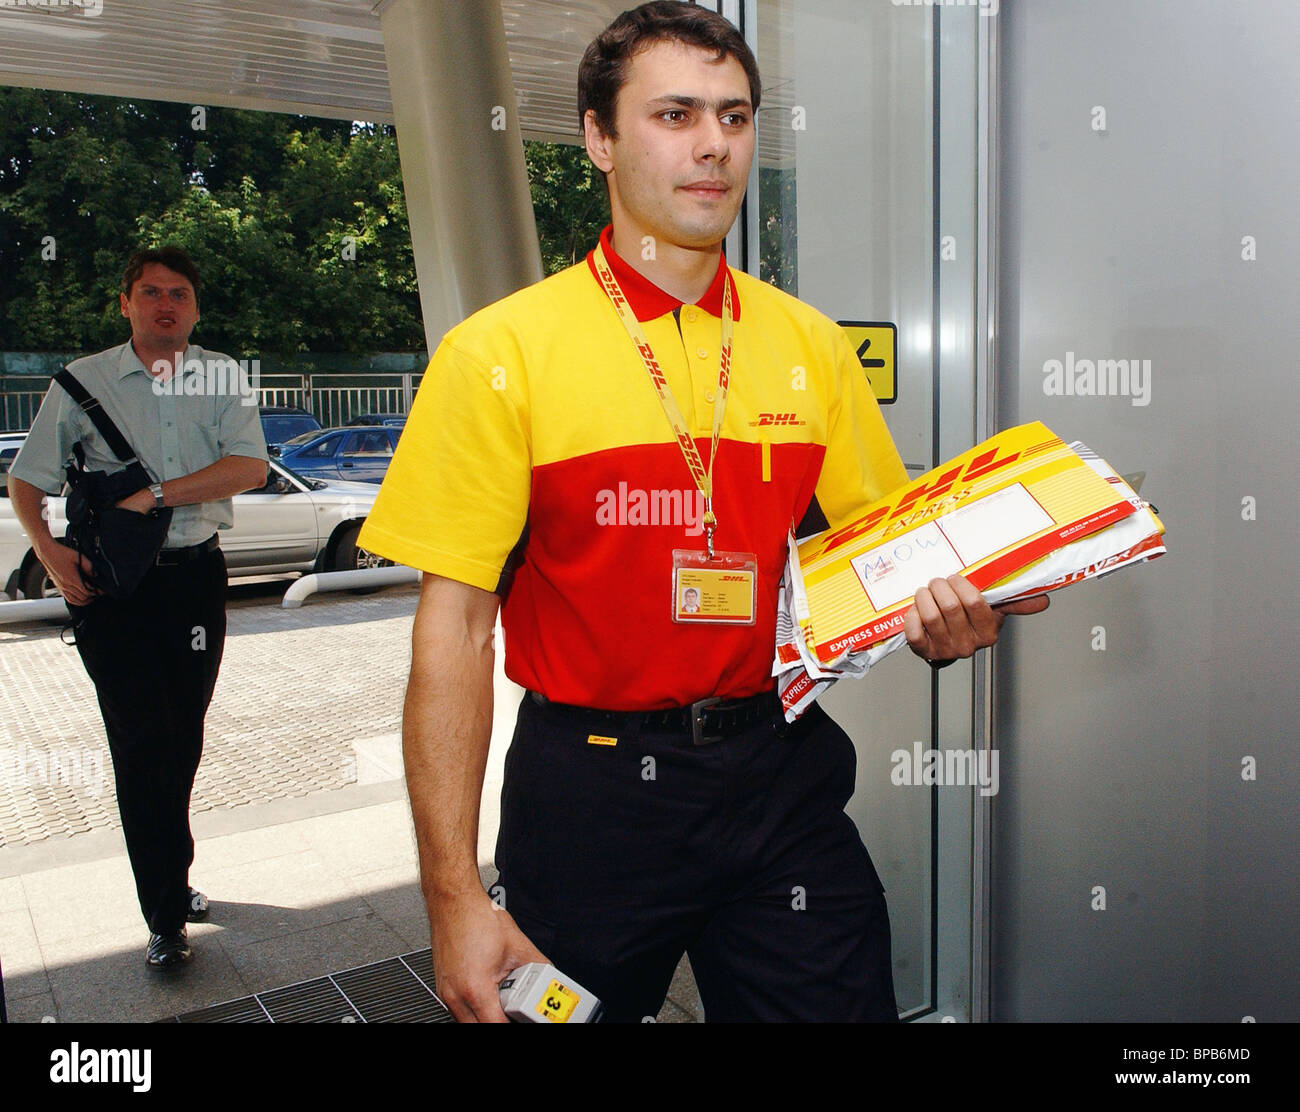 DHL Worldwide Express in operation Stock Photo - Alamy